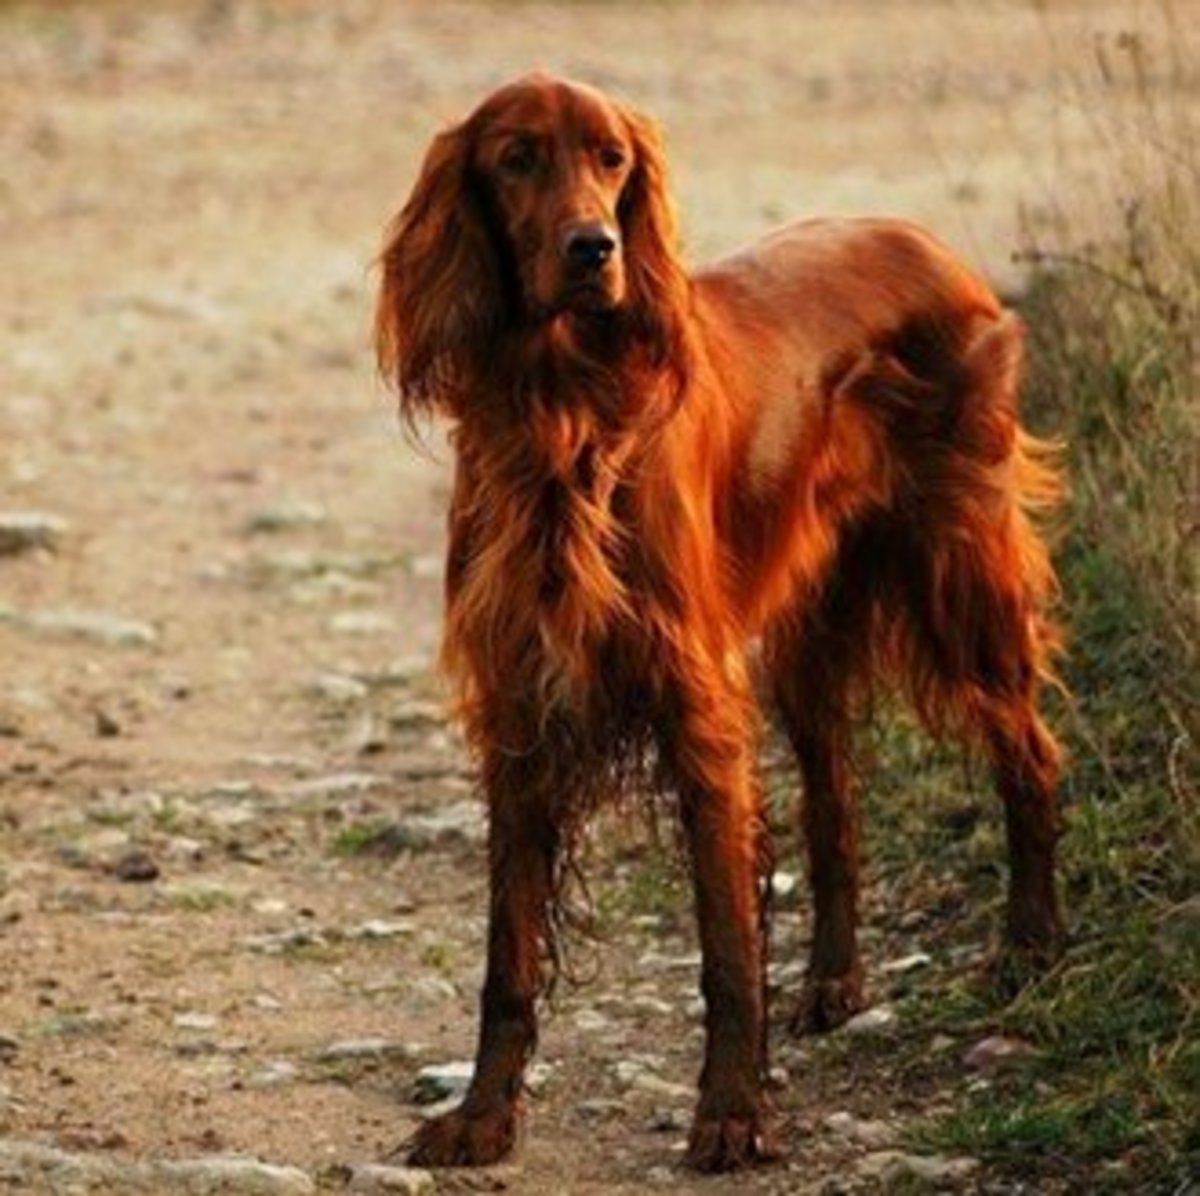 The glamorous Irish Setter is a playful breed with a rollicking temperament that makes an ideal family companion. 